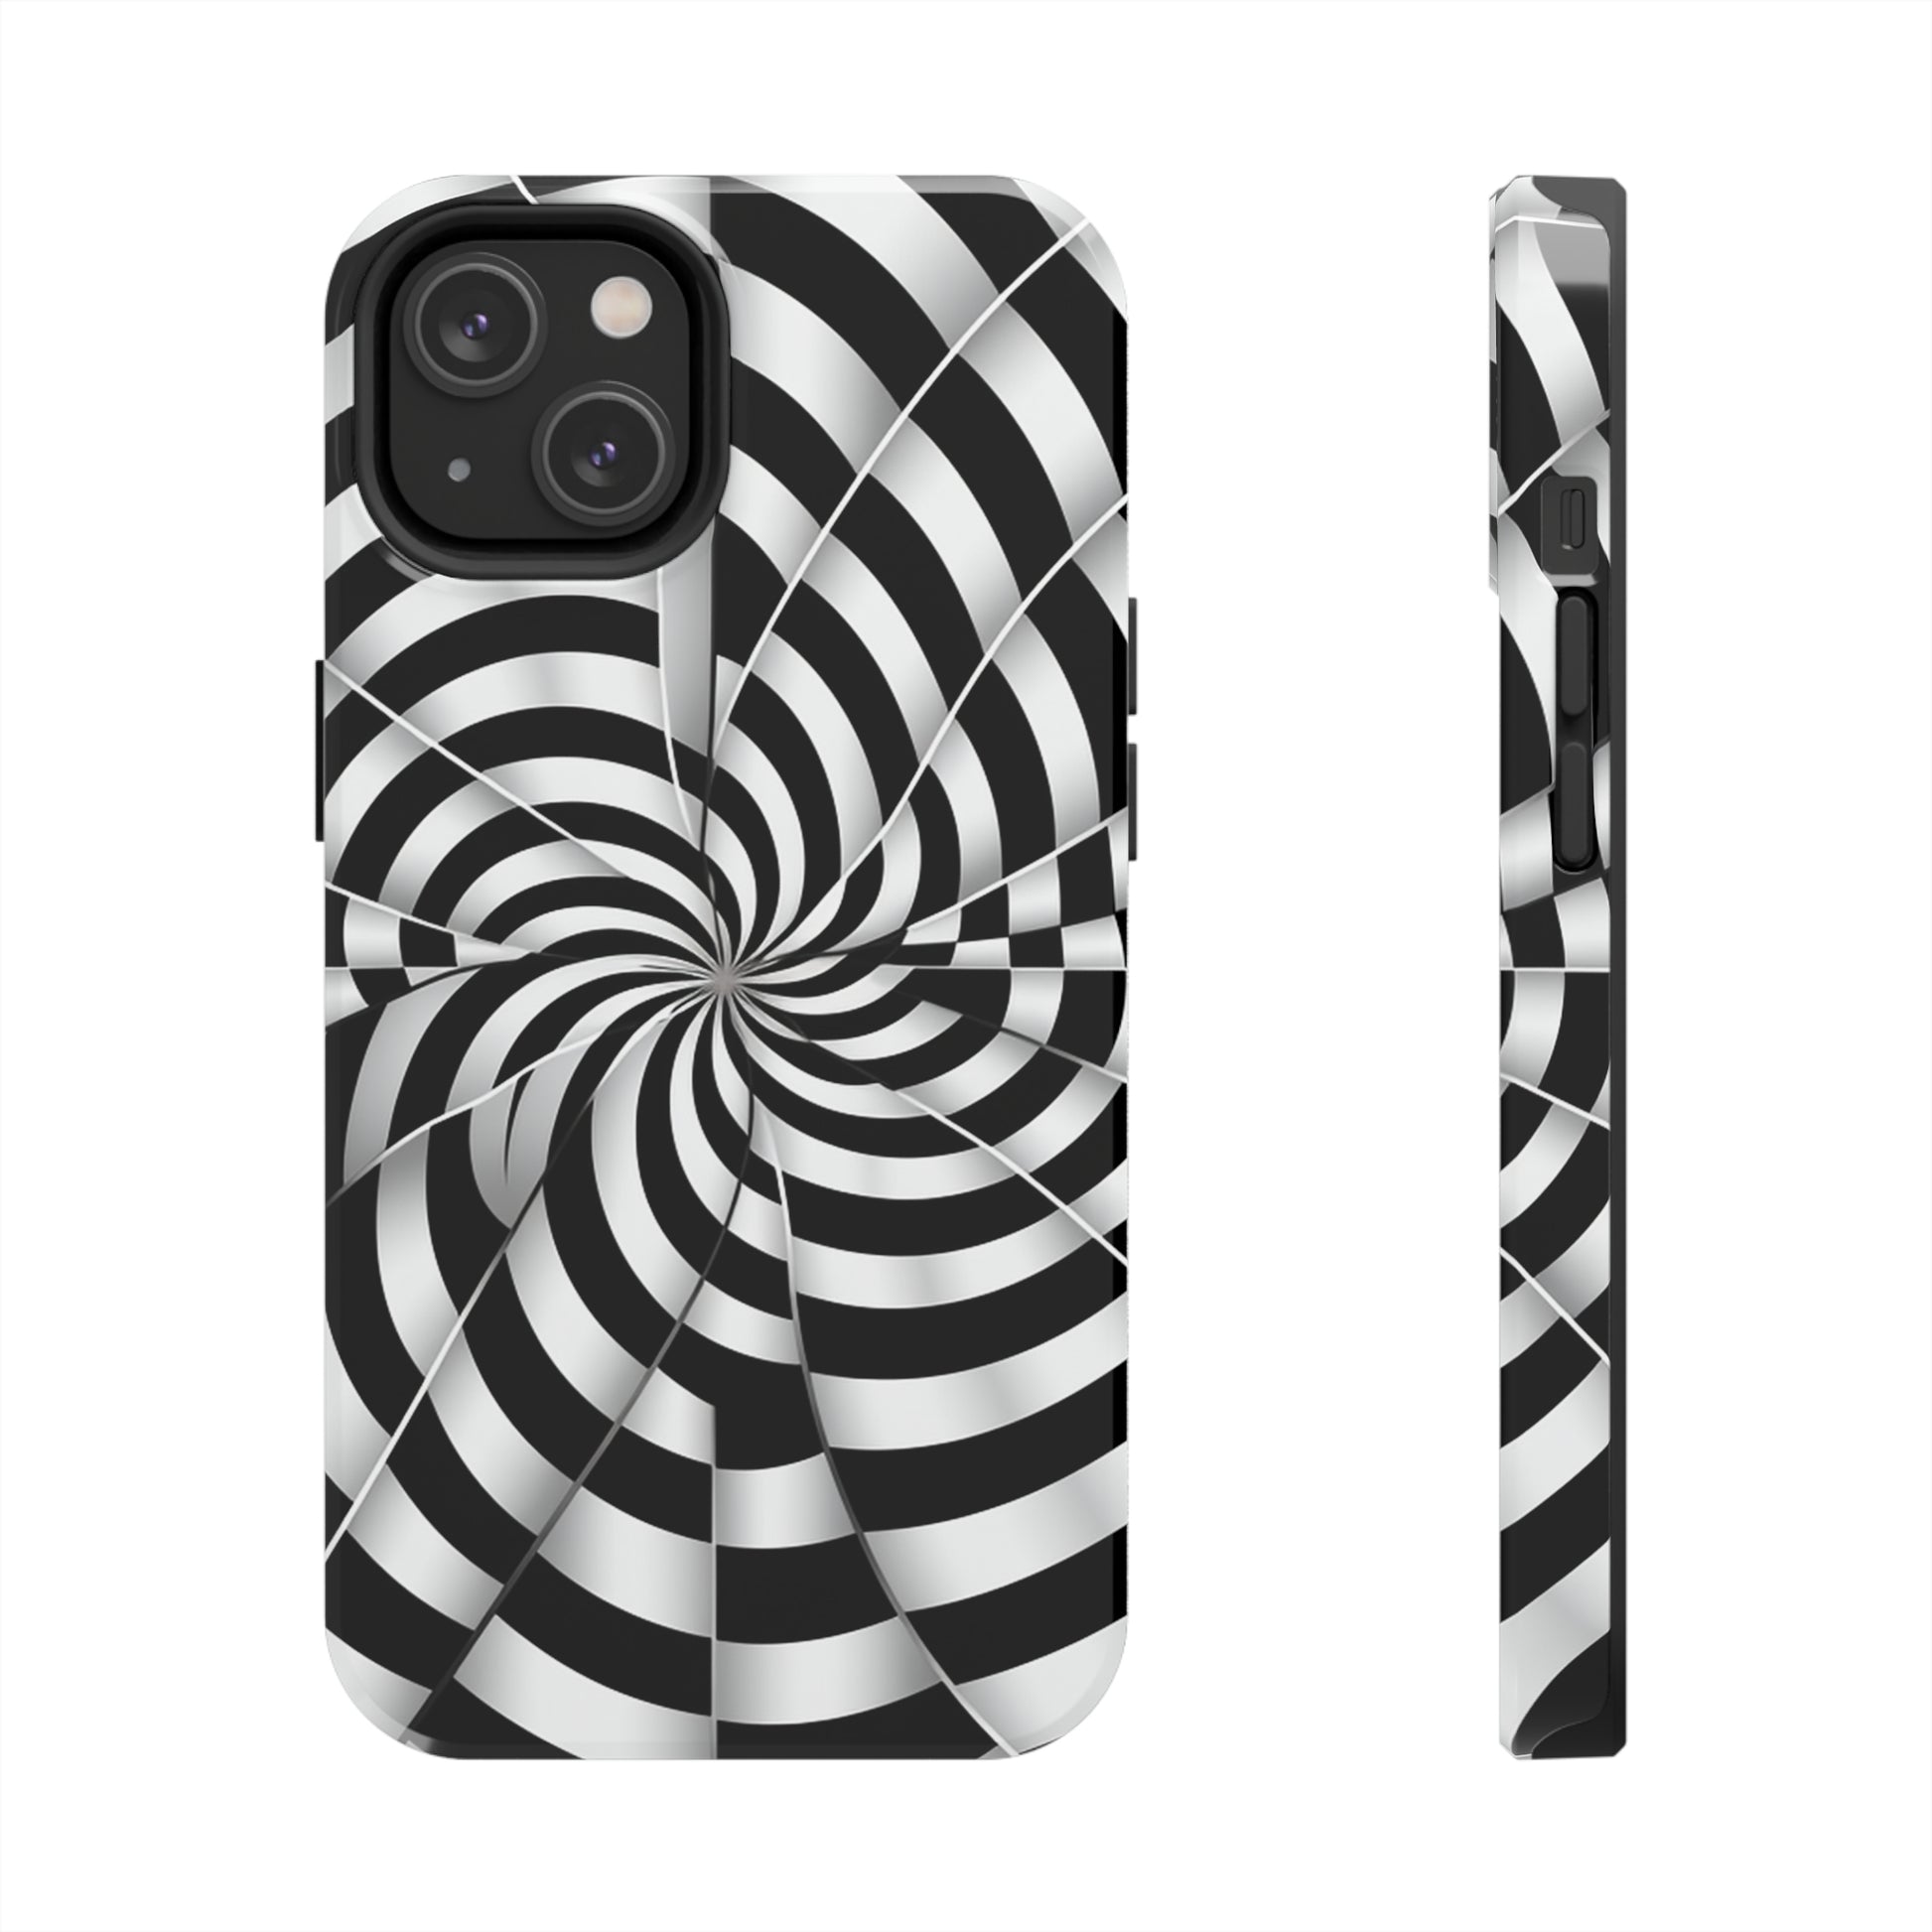 Psychedelic Phone Cover with Optical Illusion Design